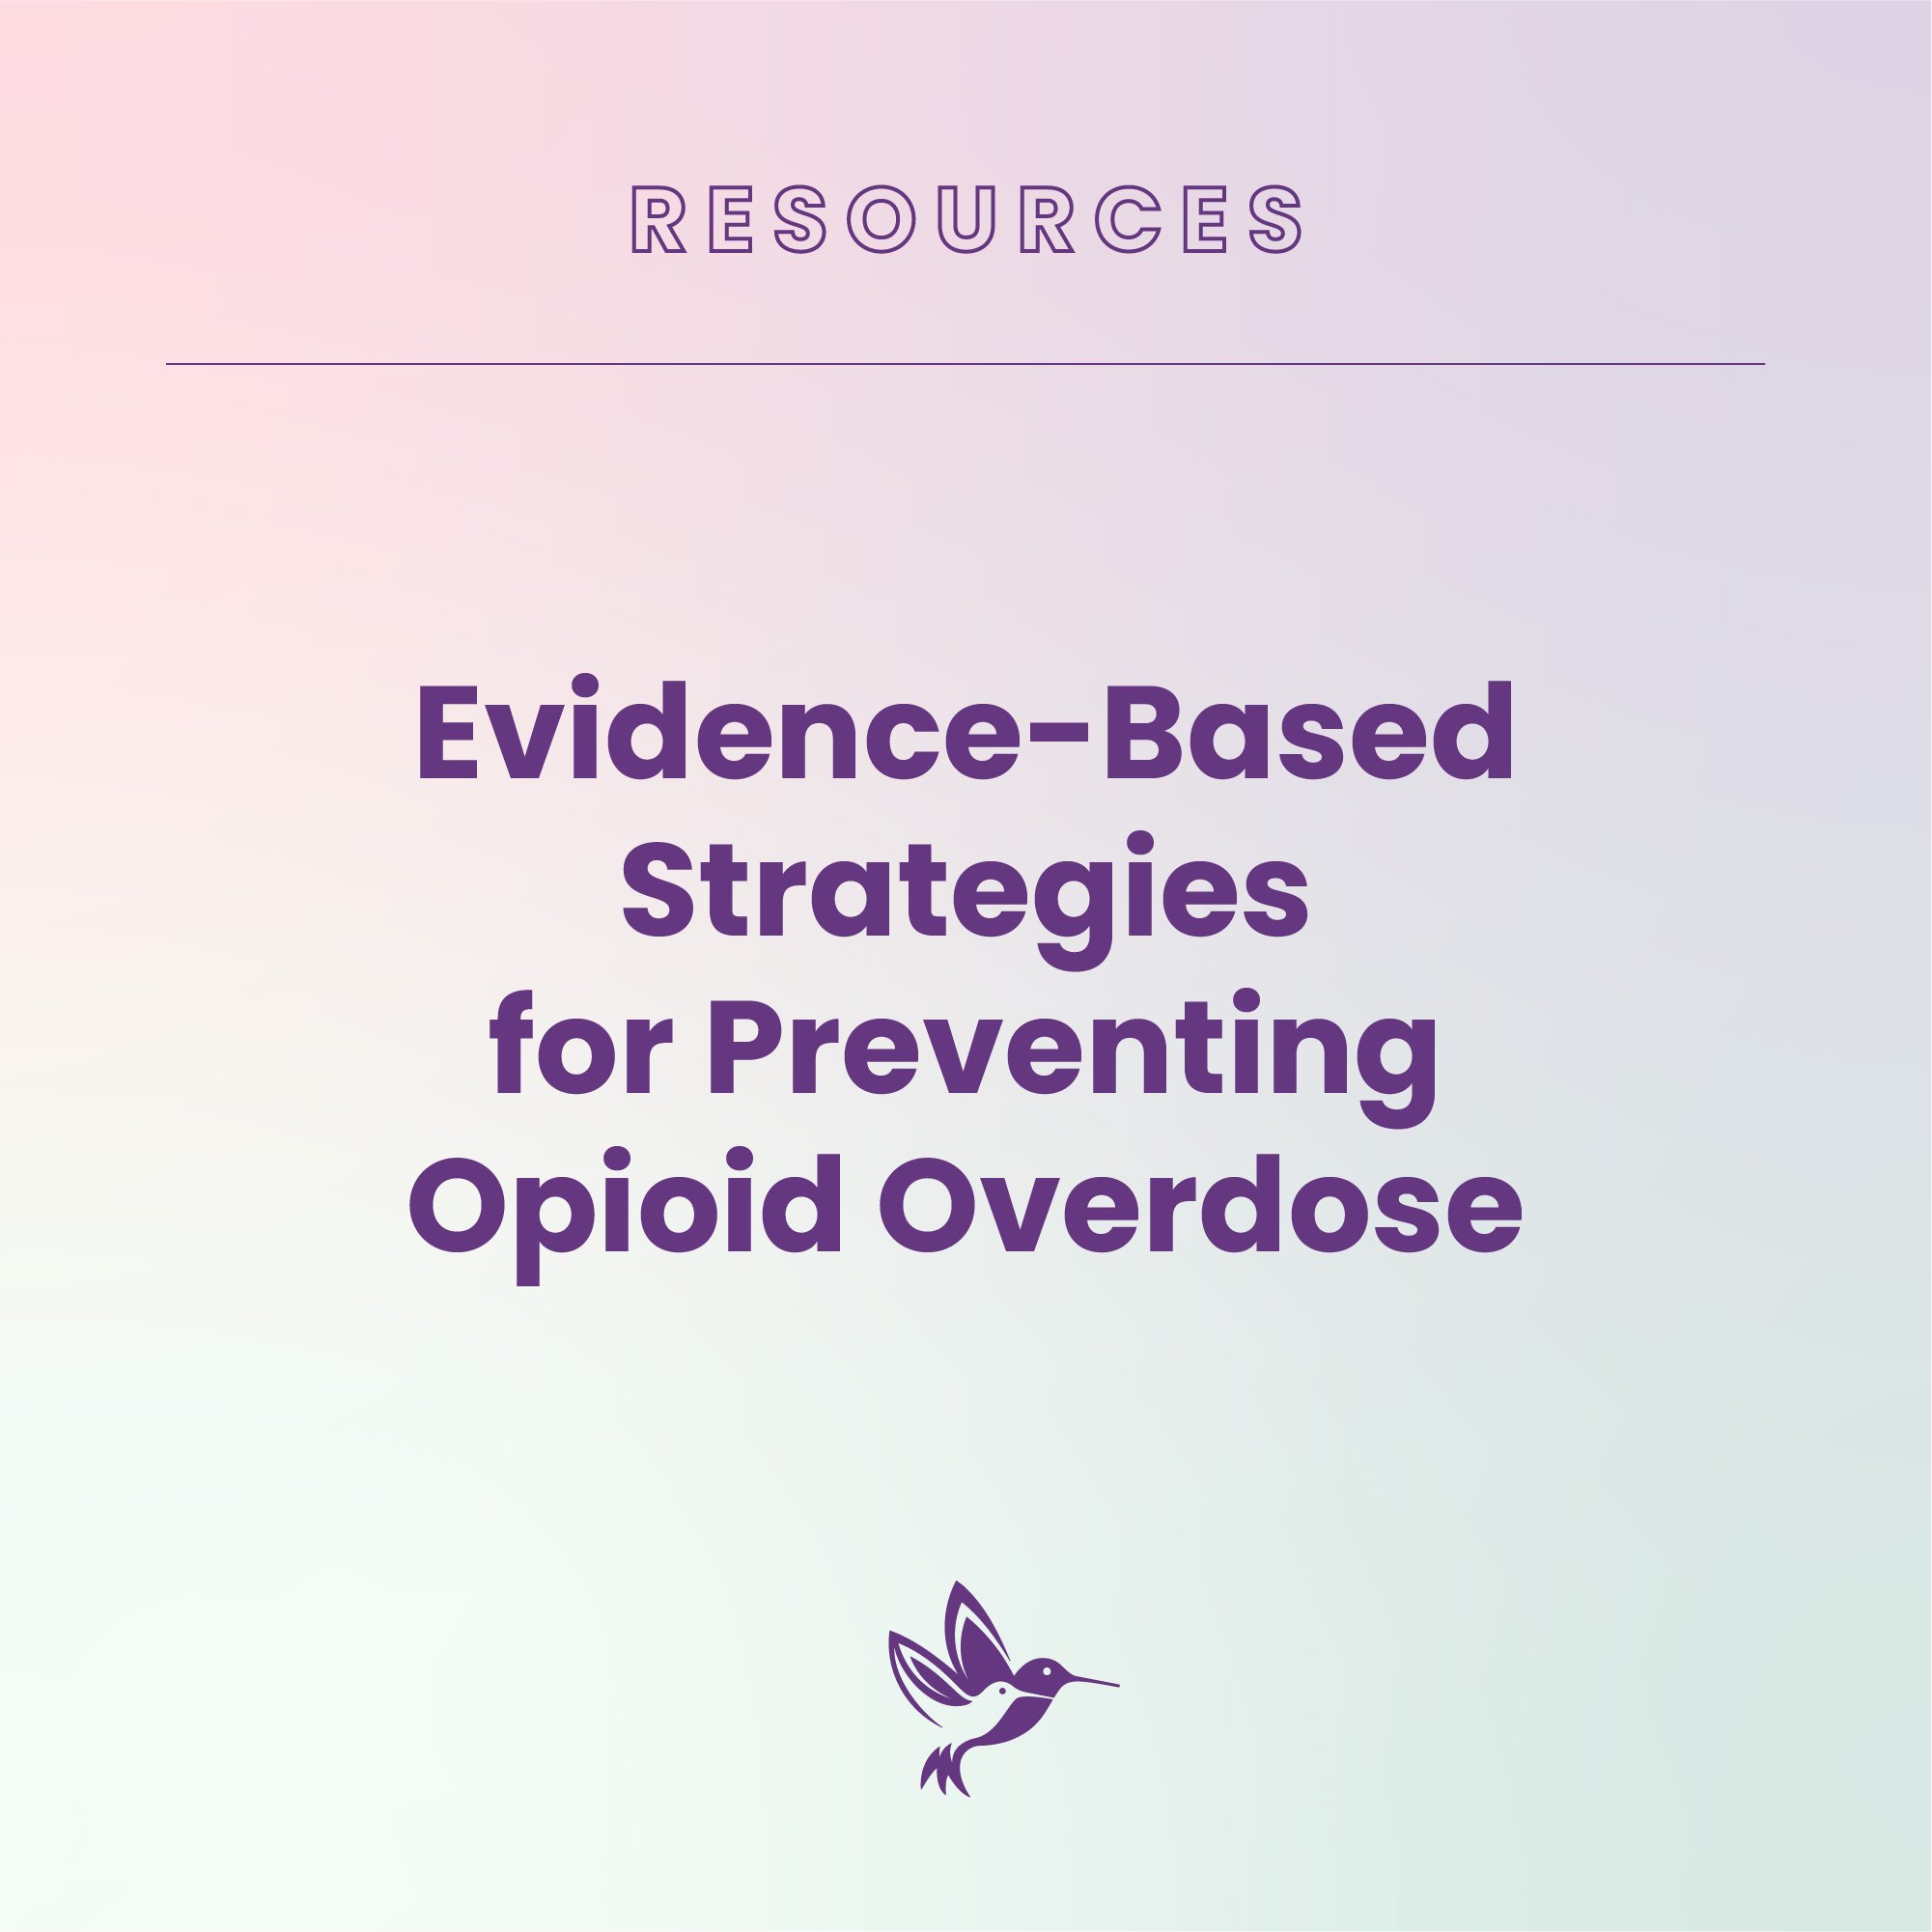 Evidence-Based Strategies for Preventing Opioid Overdose (Copy)